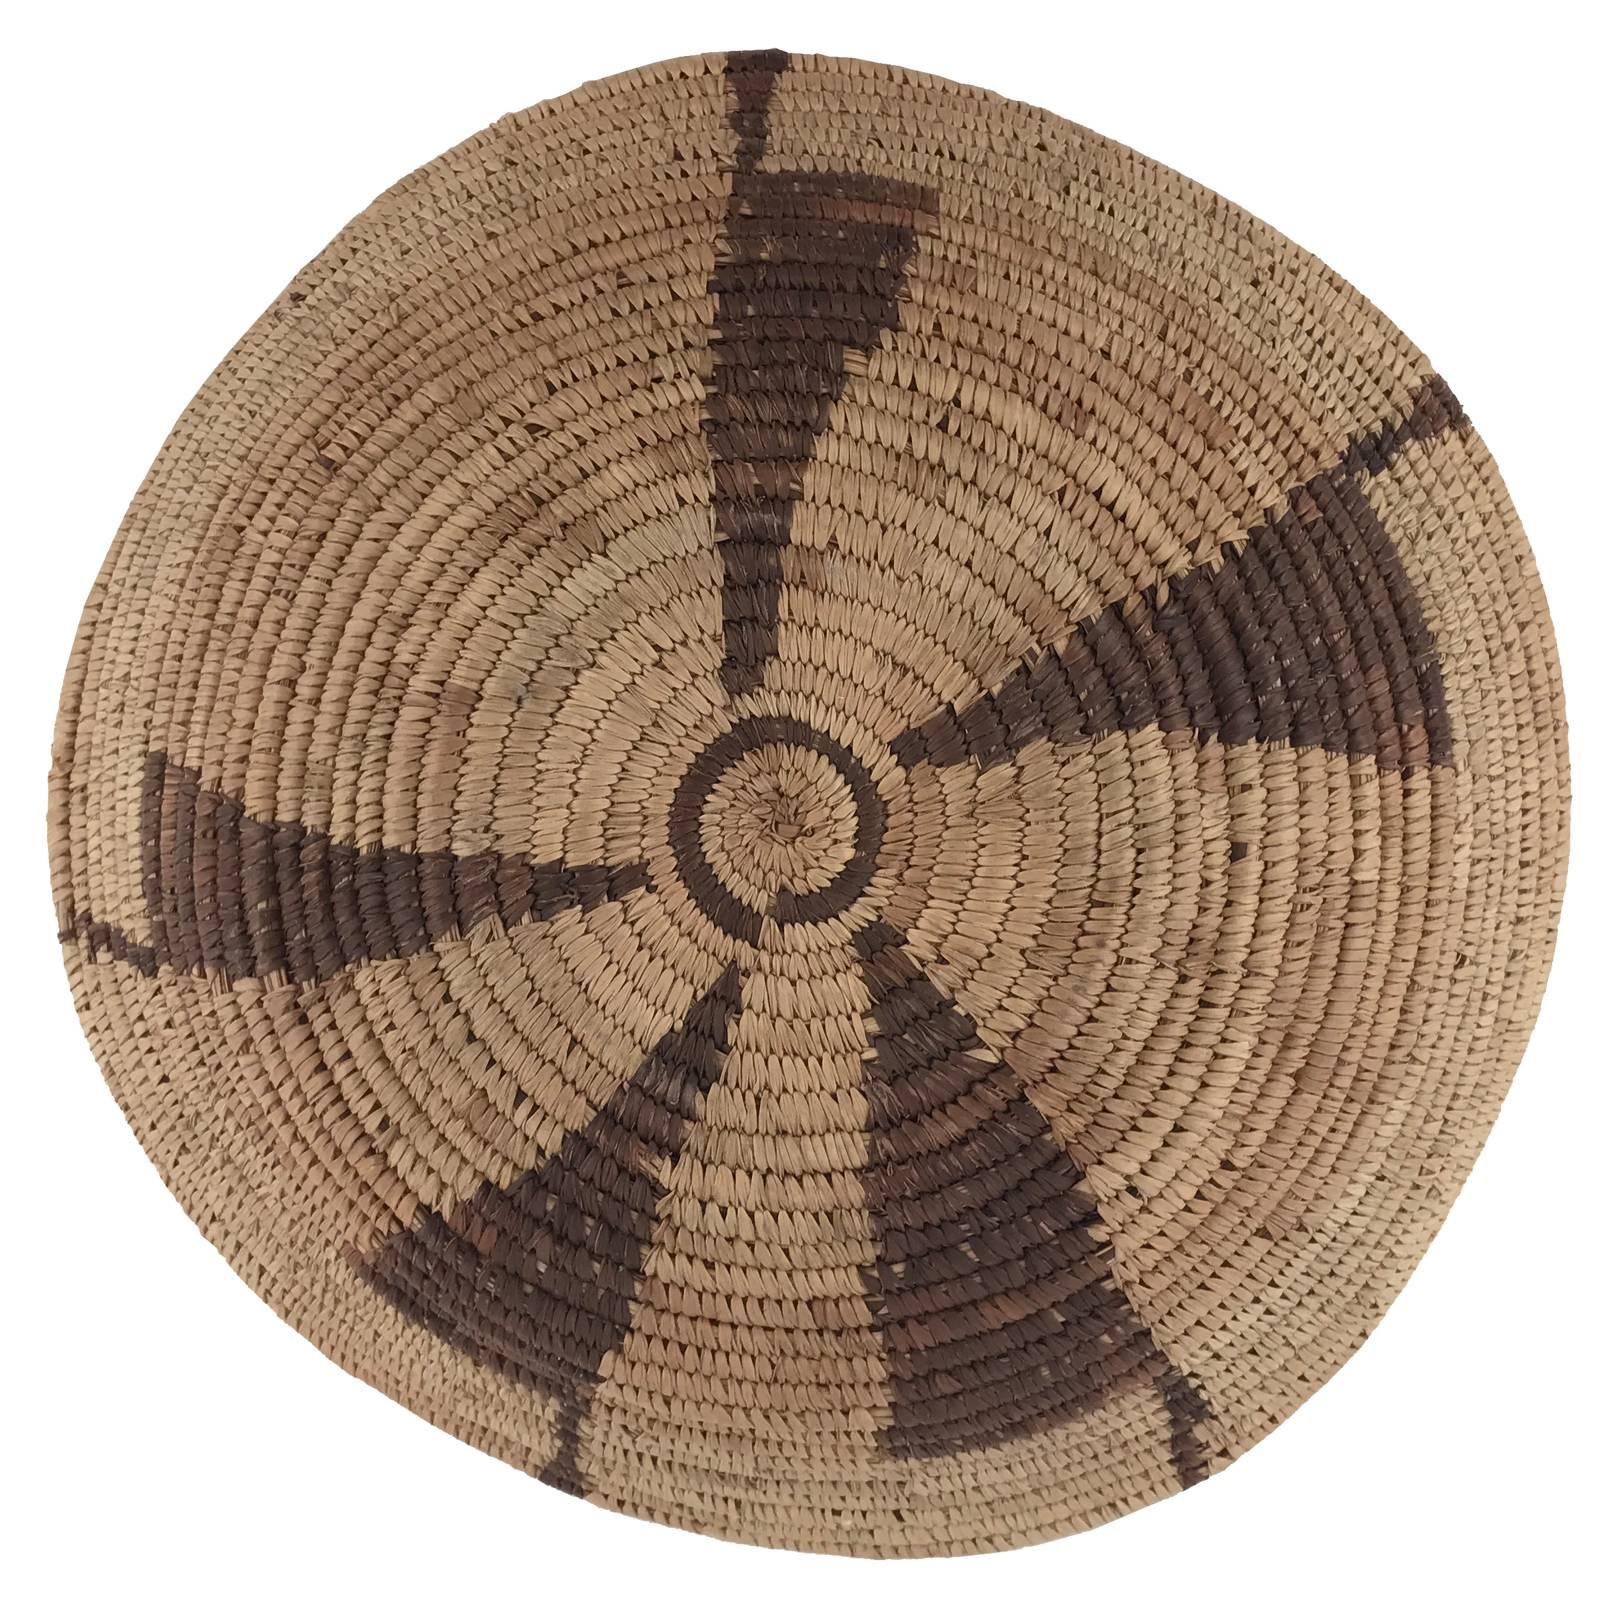 A Native American woven shallow bowl or tray decorated with contrasting triangular pattern.